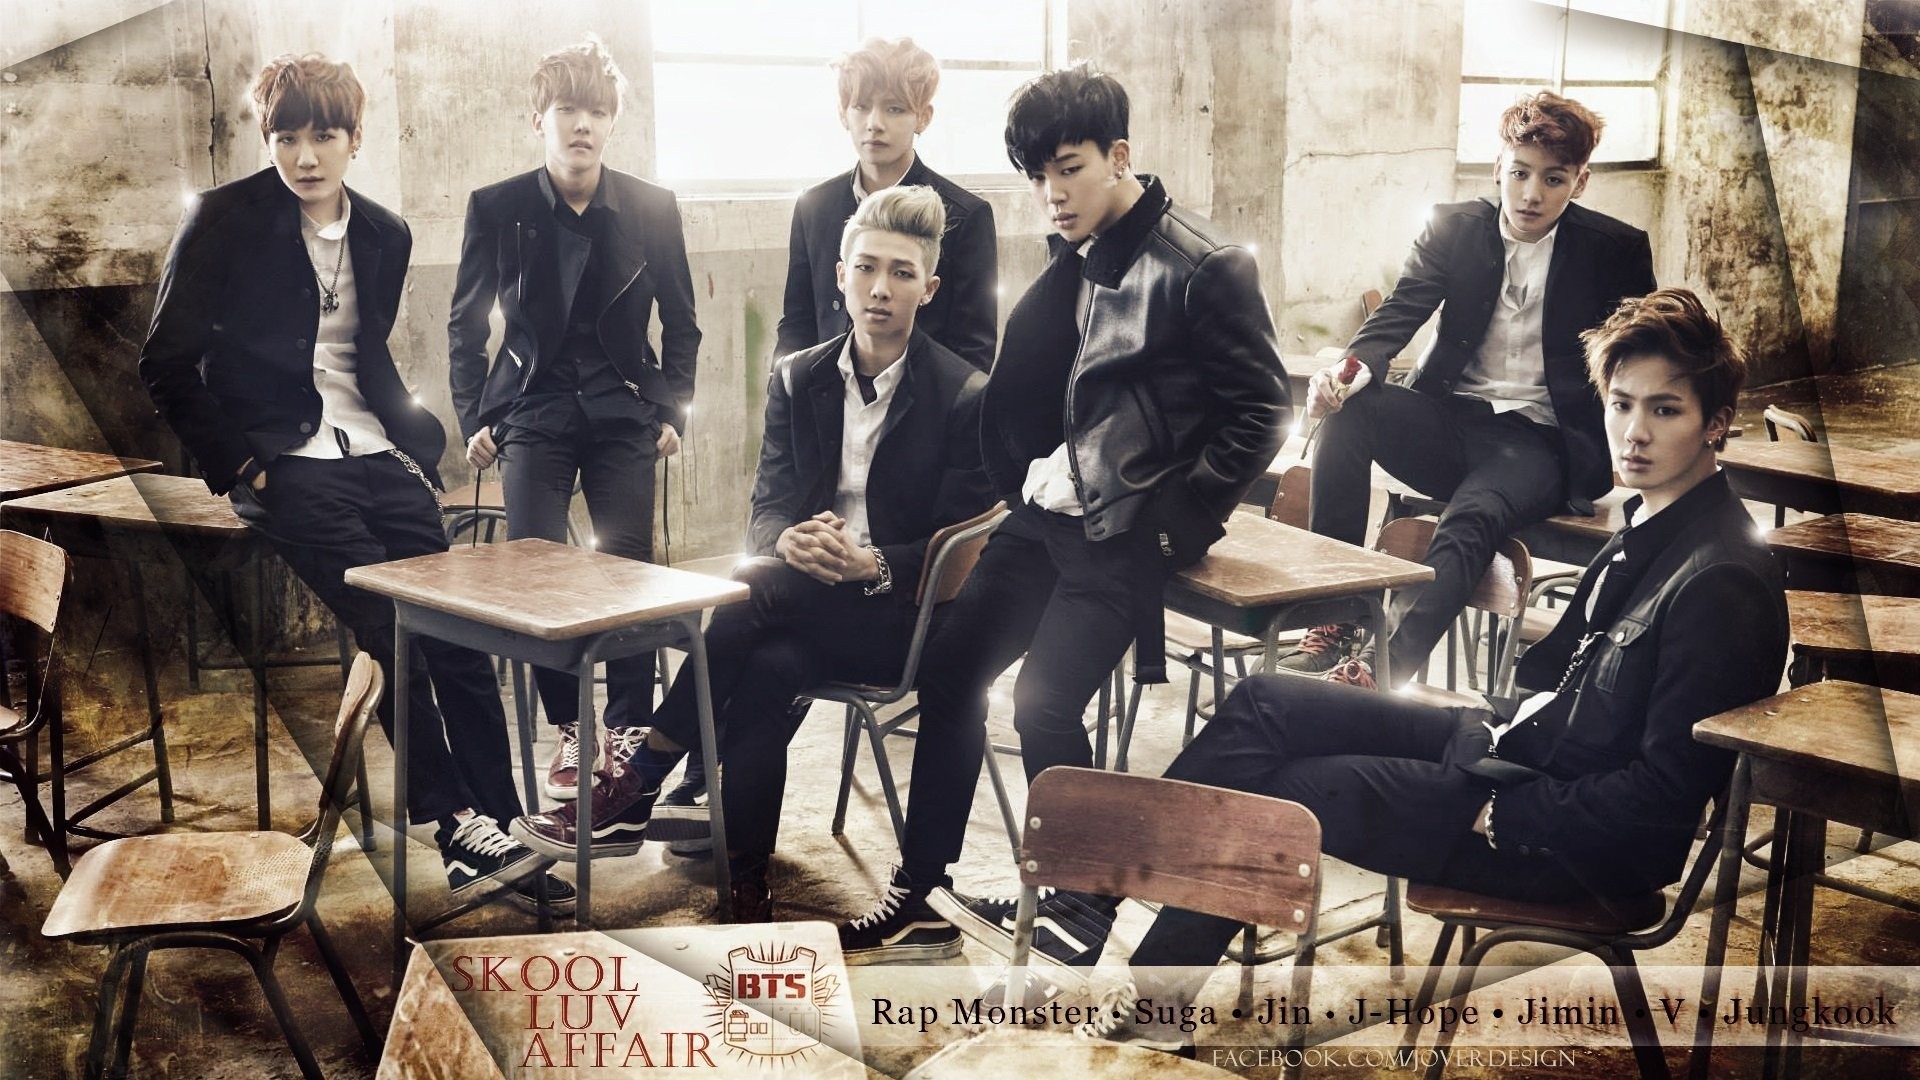 Bts - Boy In Luv Bts Photoshoot , HD Wallpaper & Backgrounds